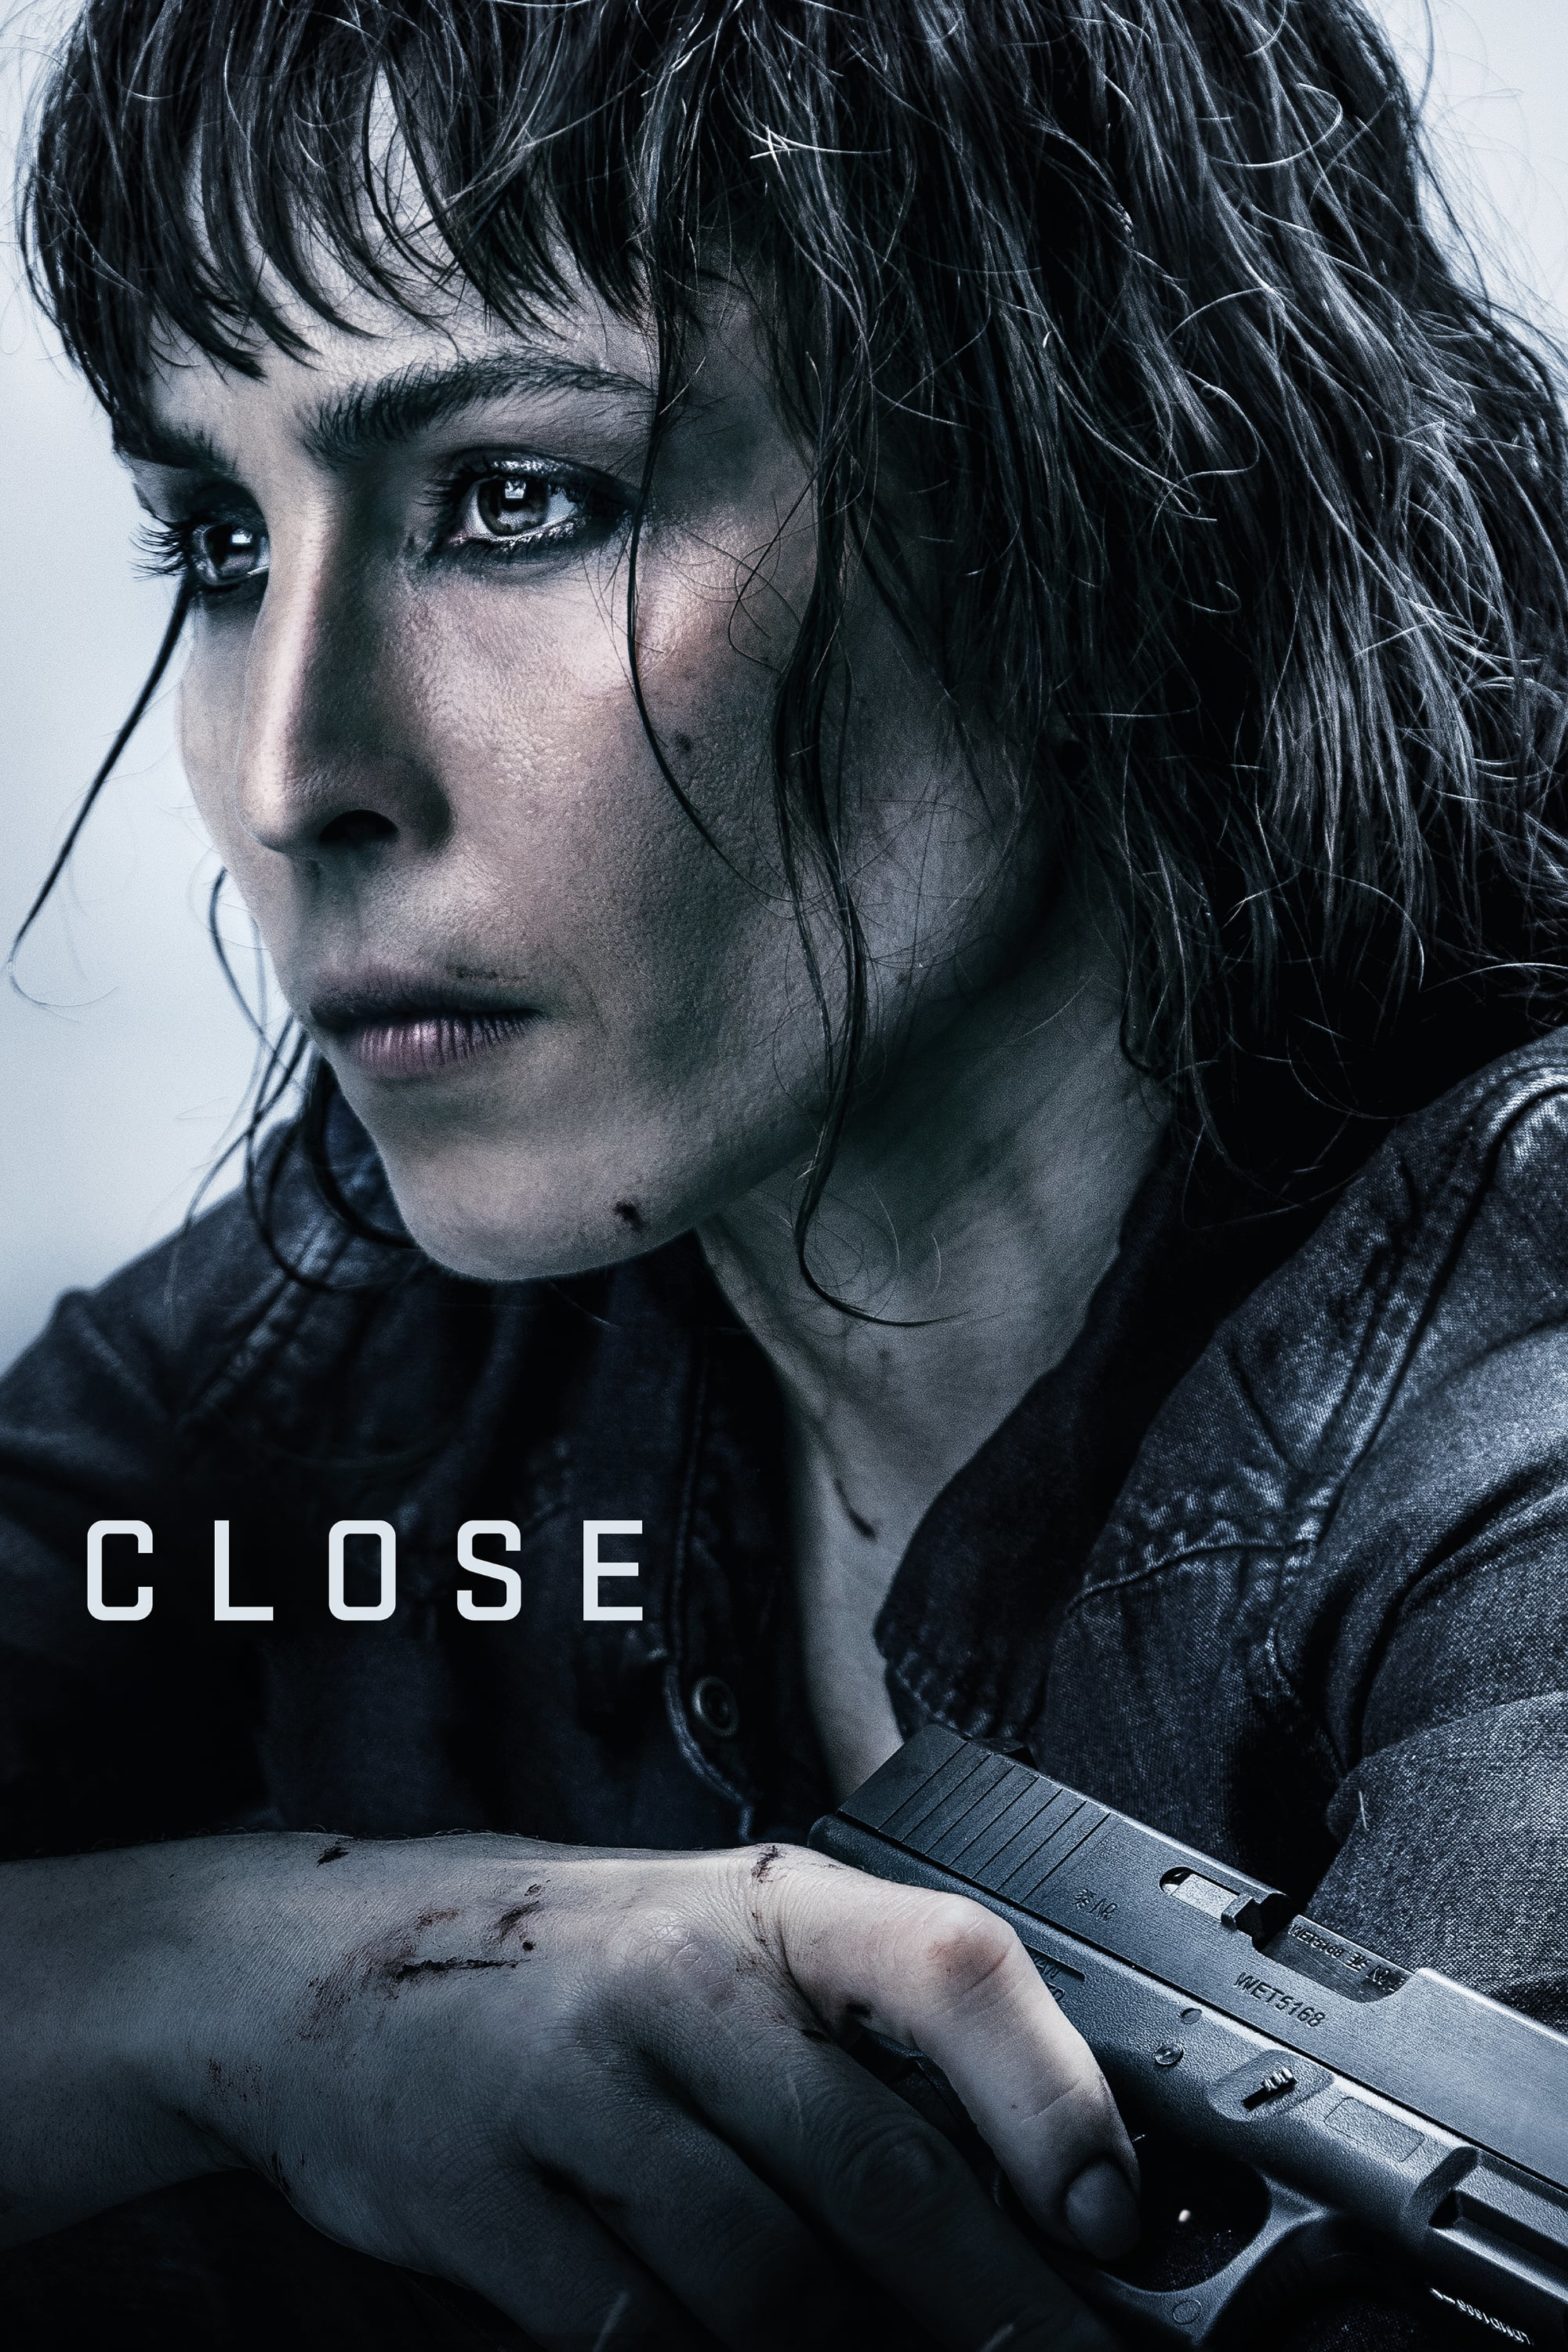 Poster for the movie "Close"